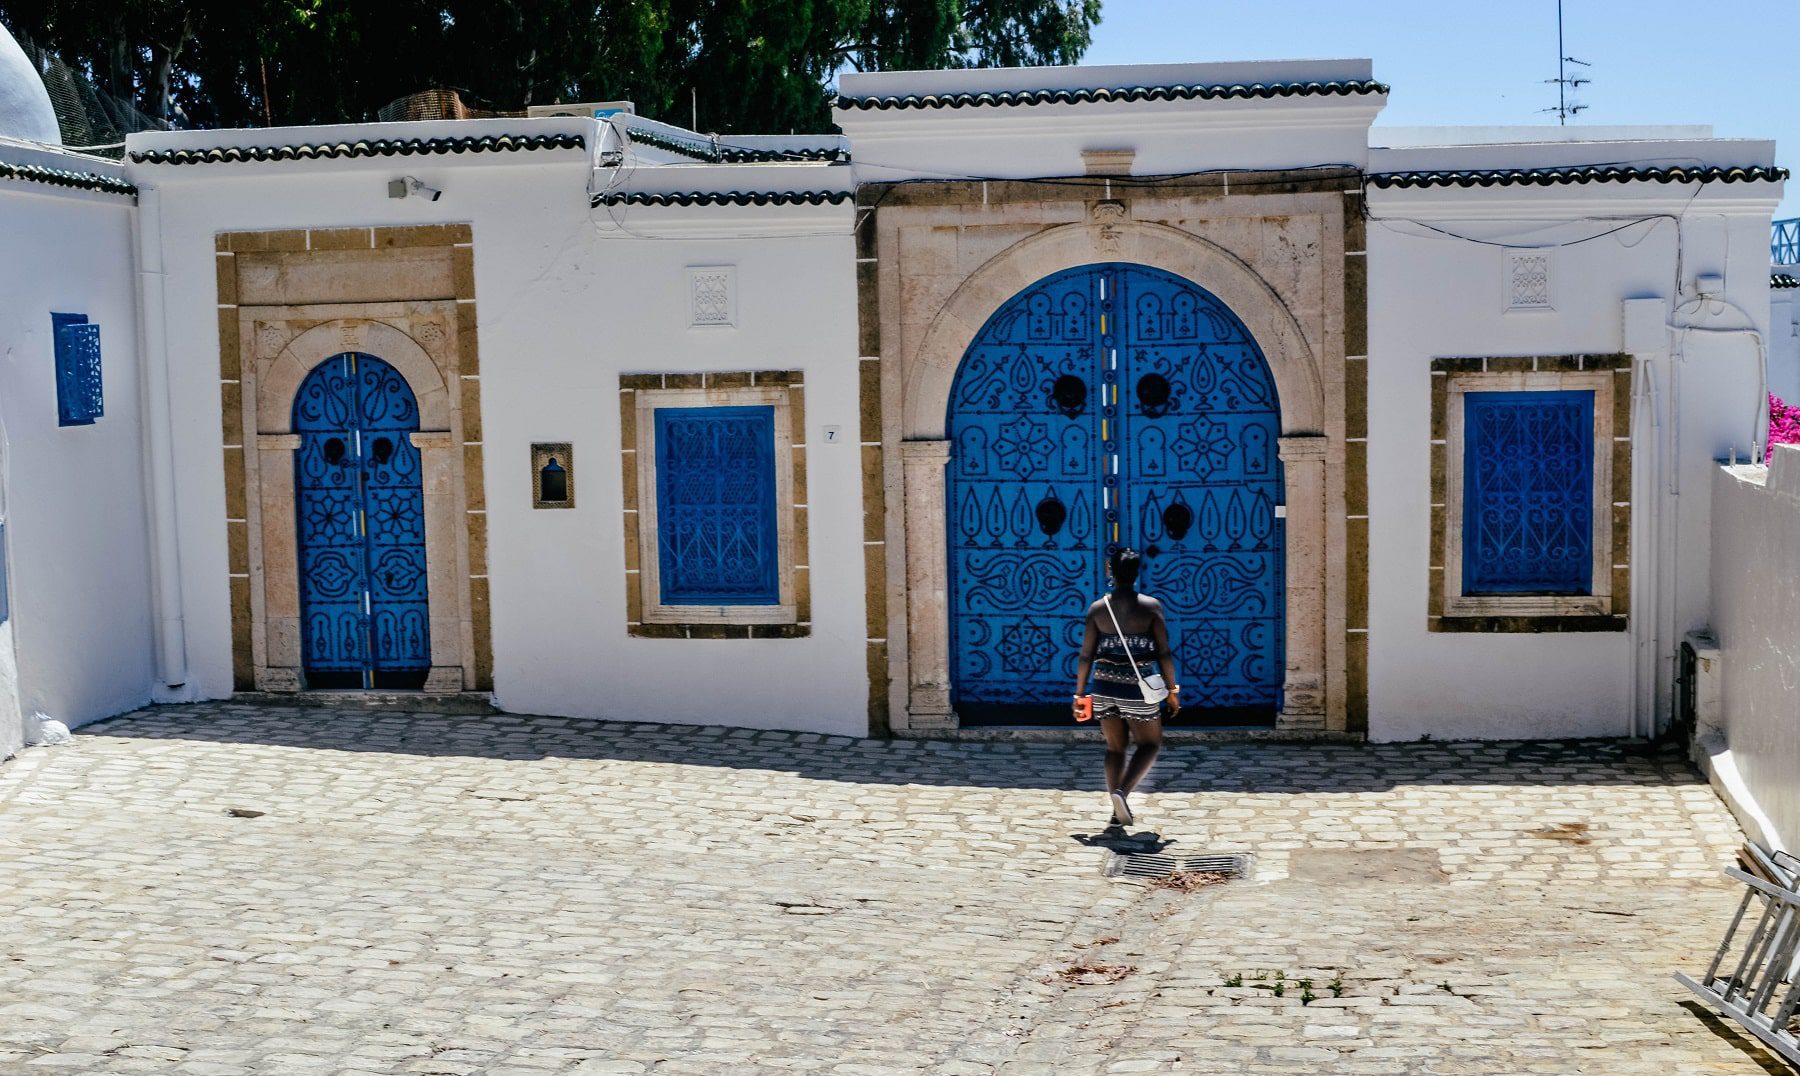 The doors are big and beautiful with intricate designs in Sidi Bou Said